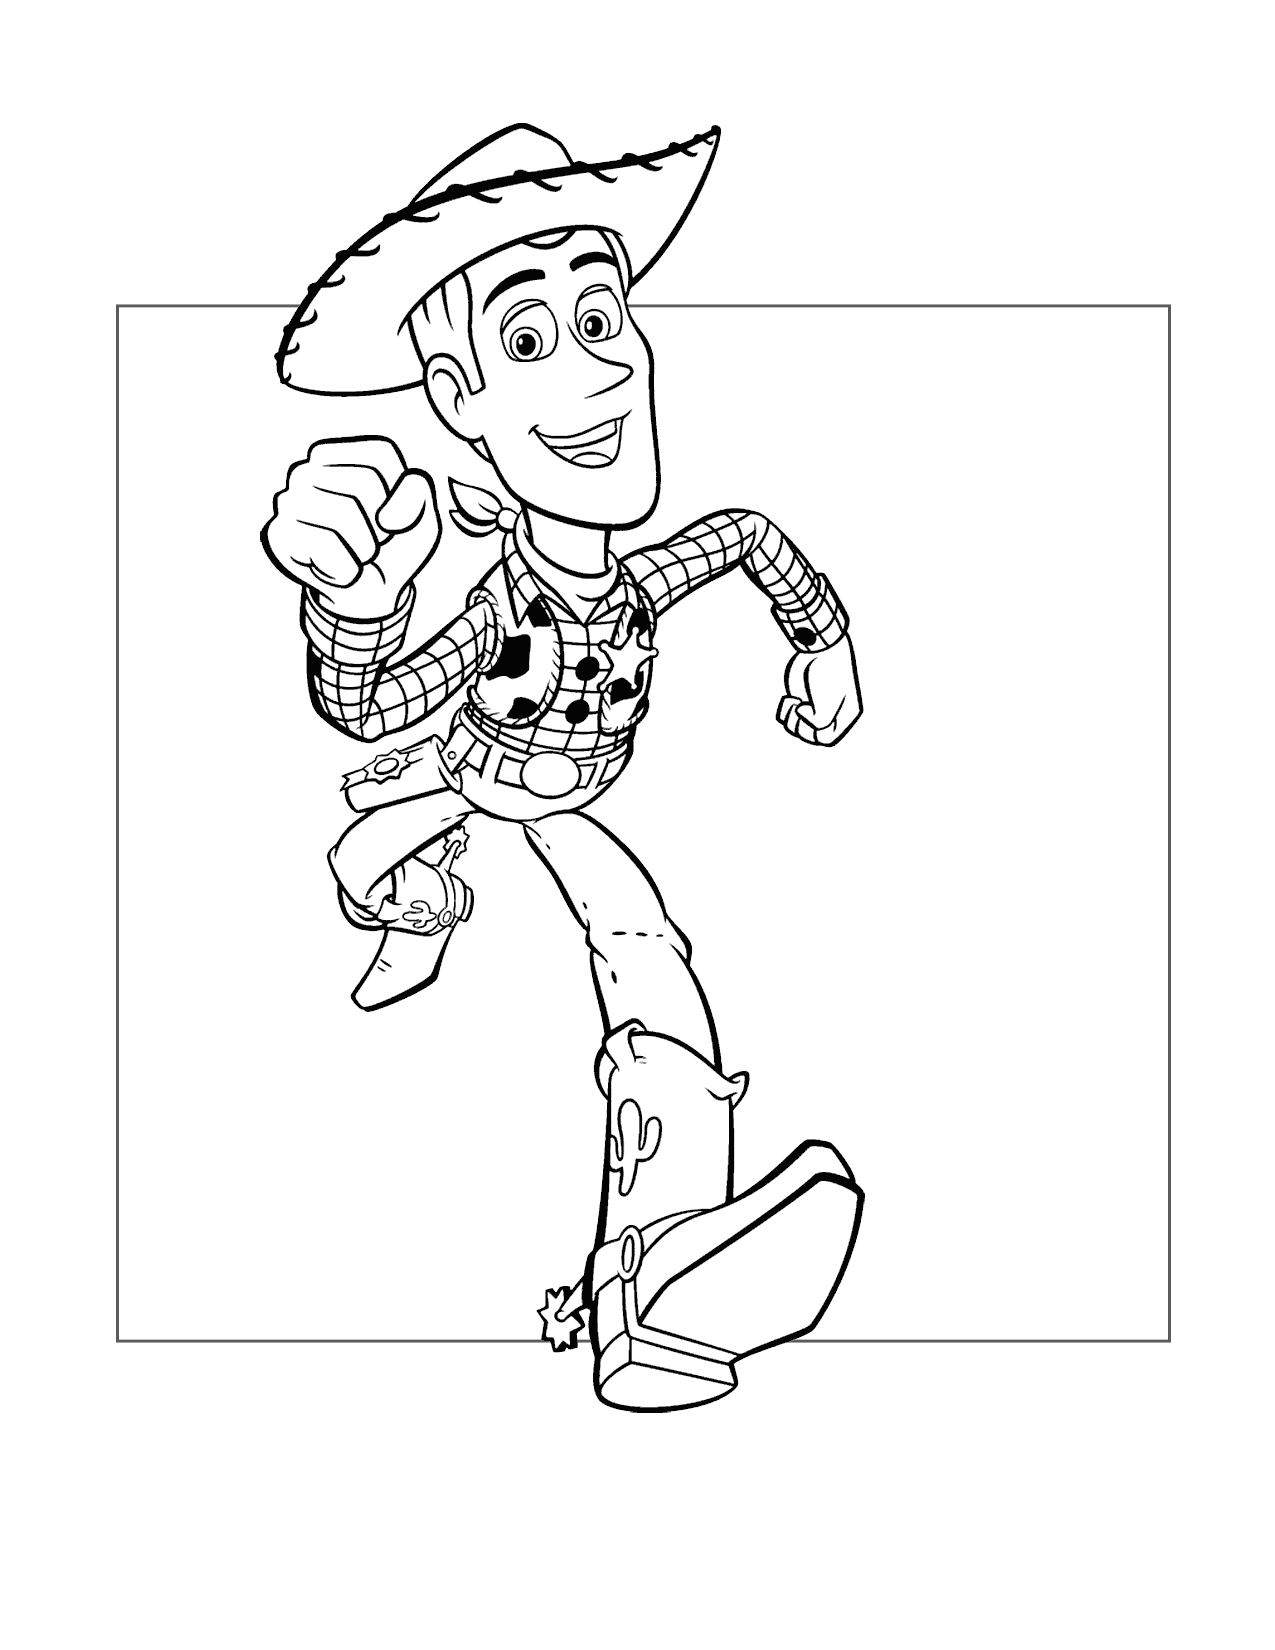 Woody Running Coloring Page